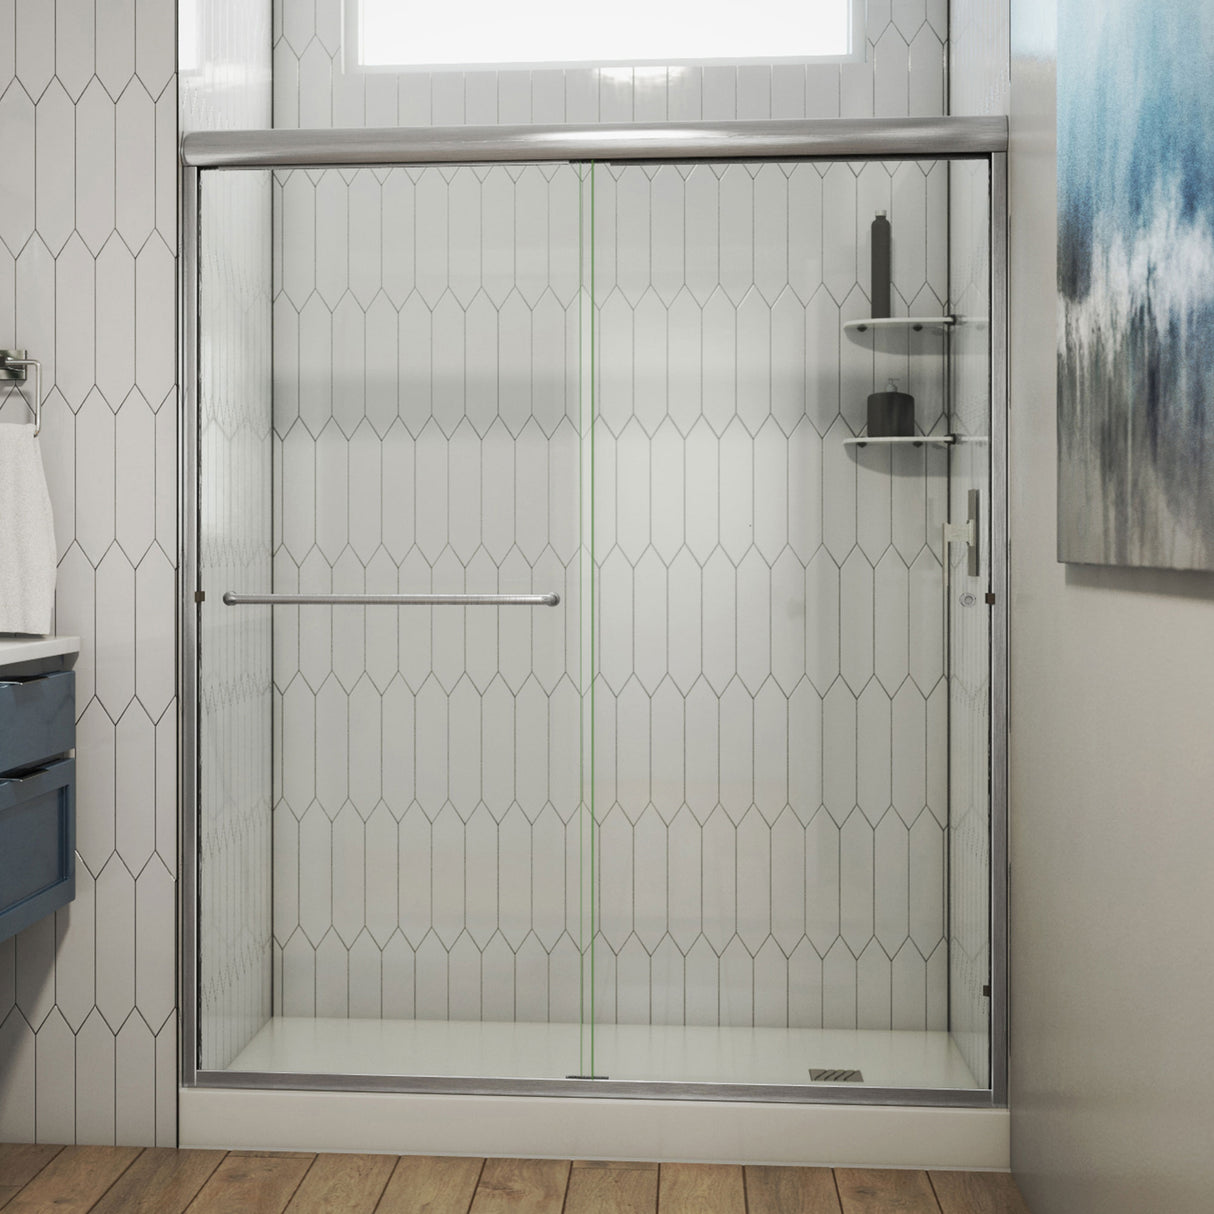 DreamLine Alliance Pro 56-60 in. W x 76 3/8 in. H Semi-Frameless Bypass Sliding Shower Door in Brushed Nickel and Clear Glass